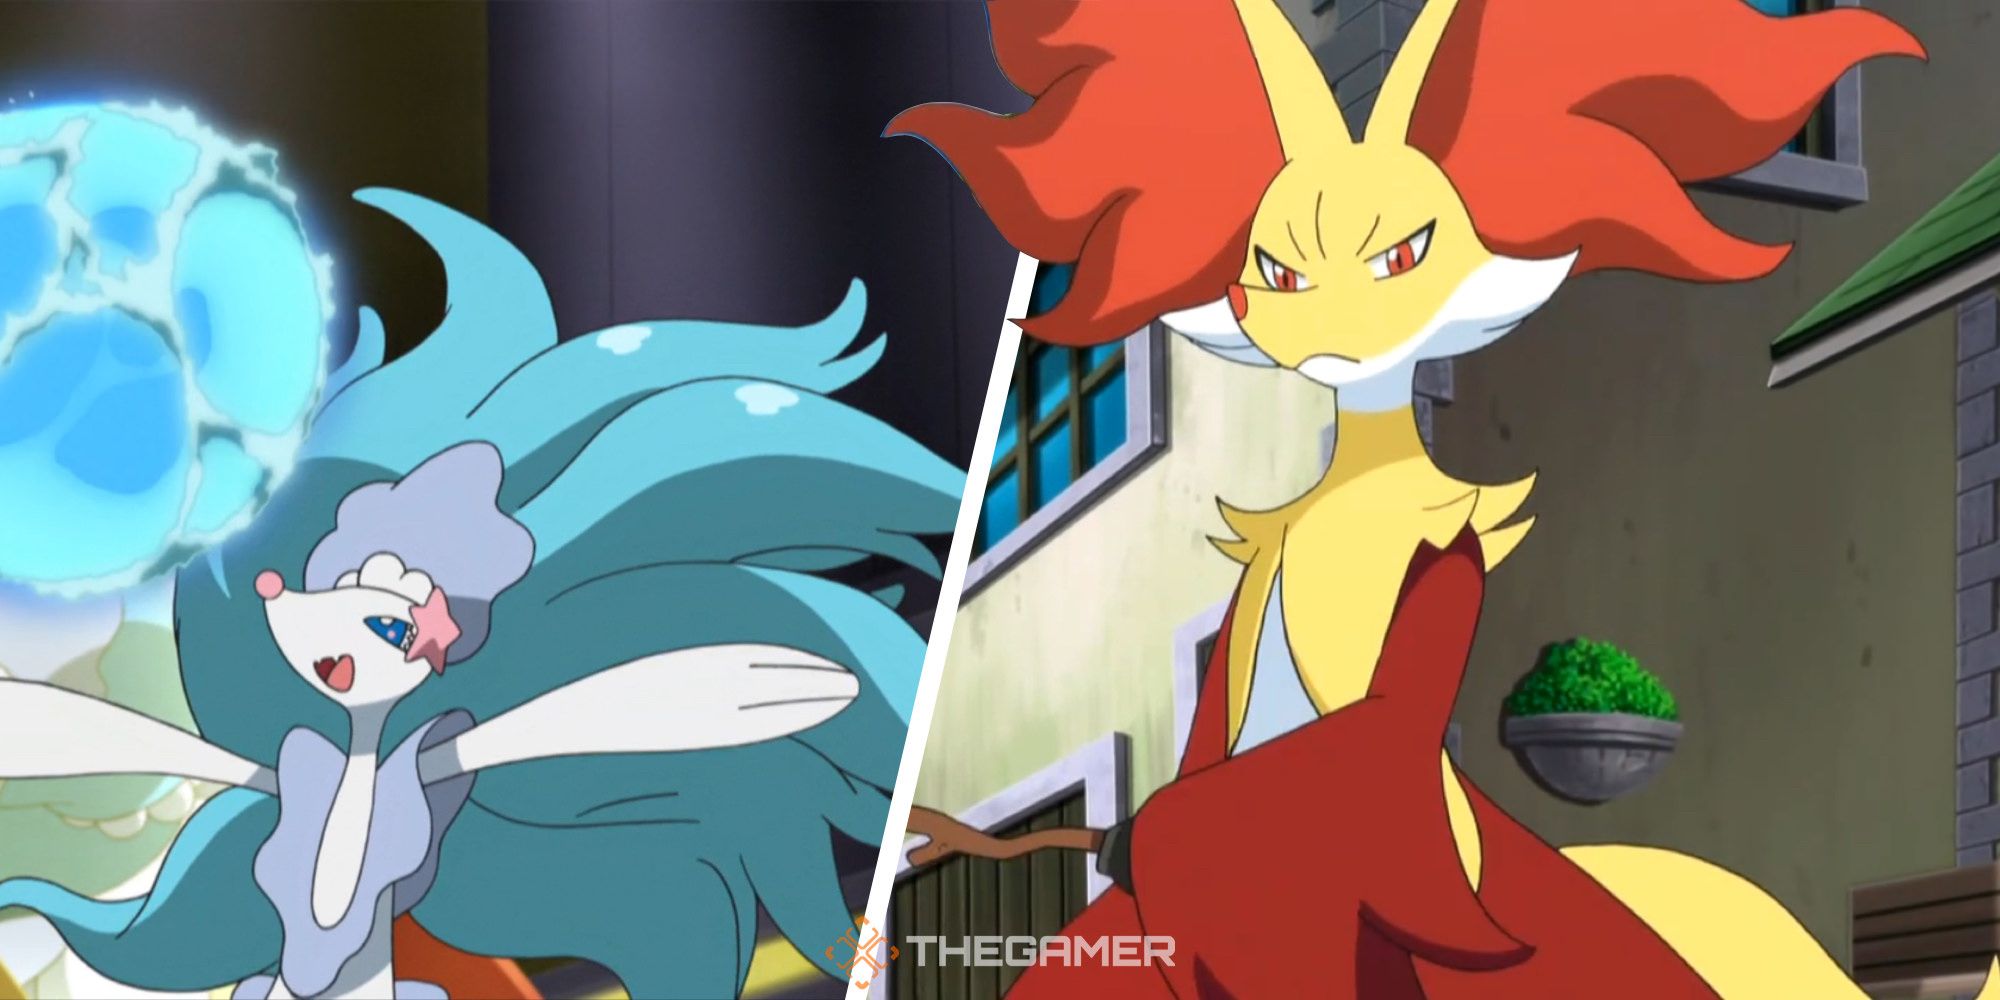 SoulSilverArt on X: If we believe eclipse's hints.There may be a  connection between Gen5 Pokémon & the Gen9 starters.But I hadnt thought  about them looking like the Gen 5 starters!What if Quaxly=Samurott,using